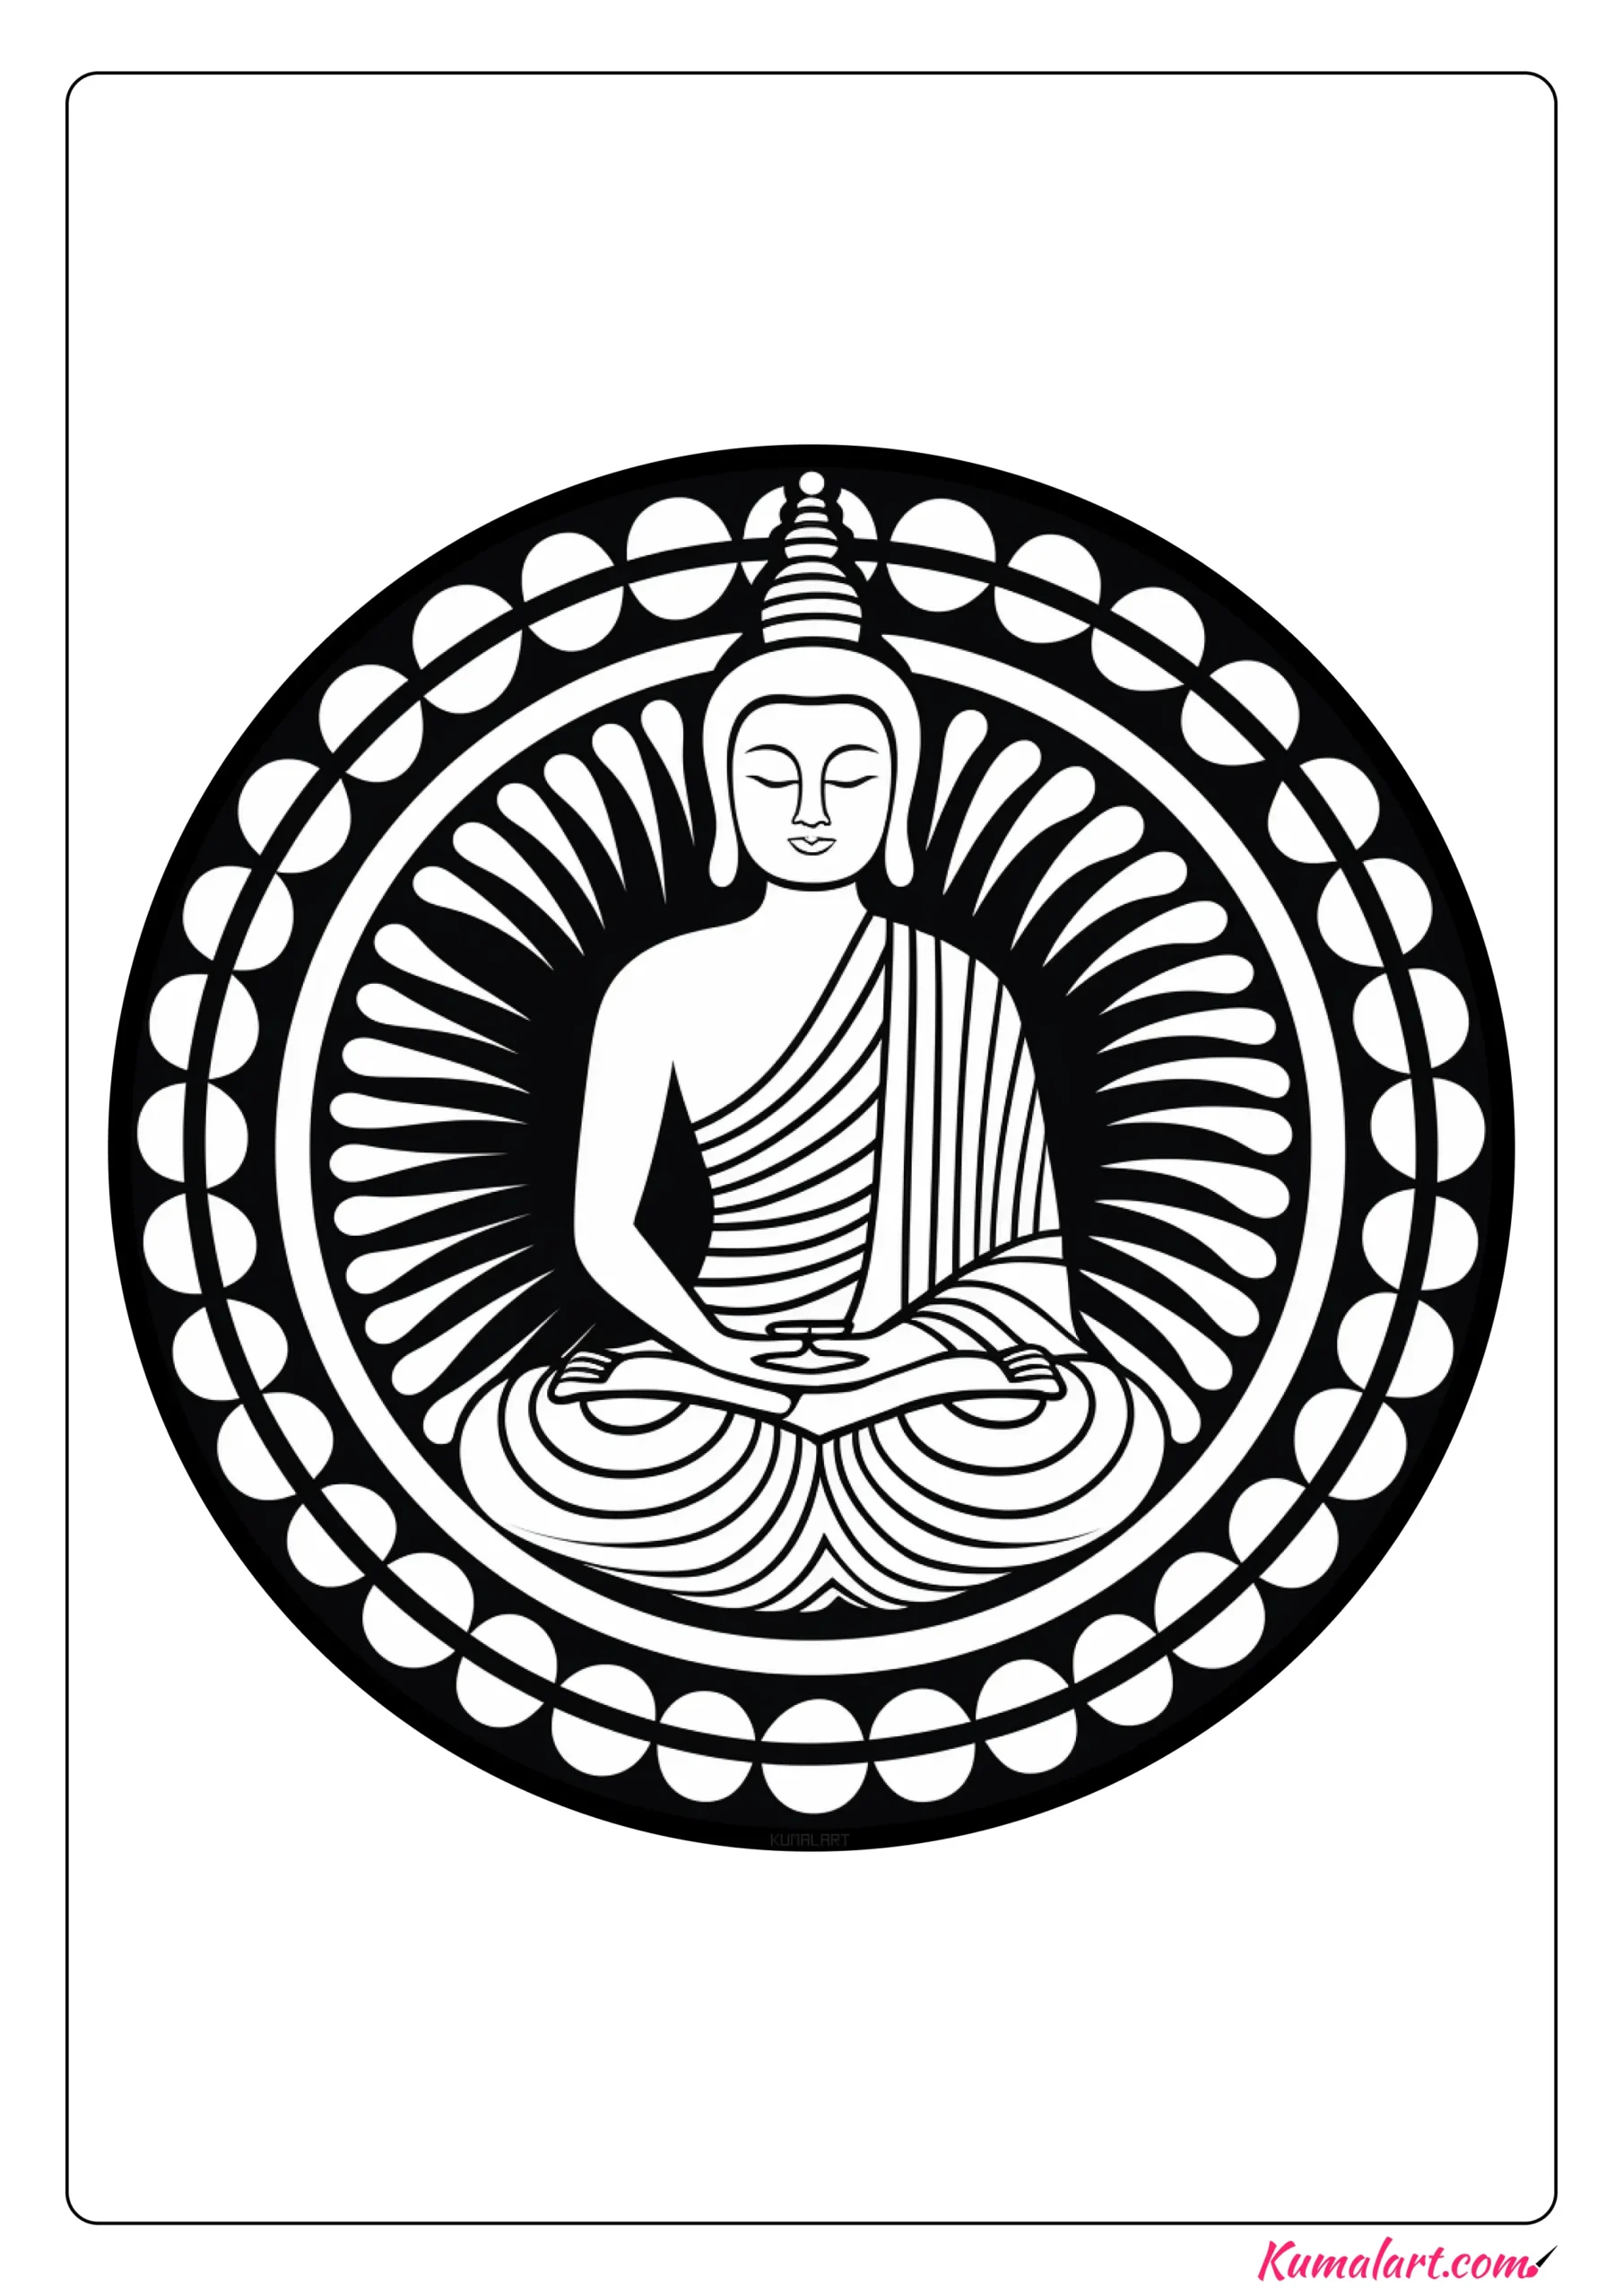 Mindful Buddhist Coloring Page